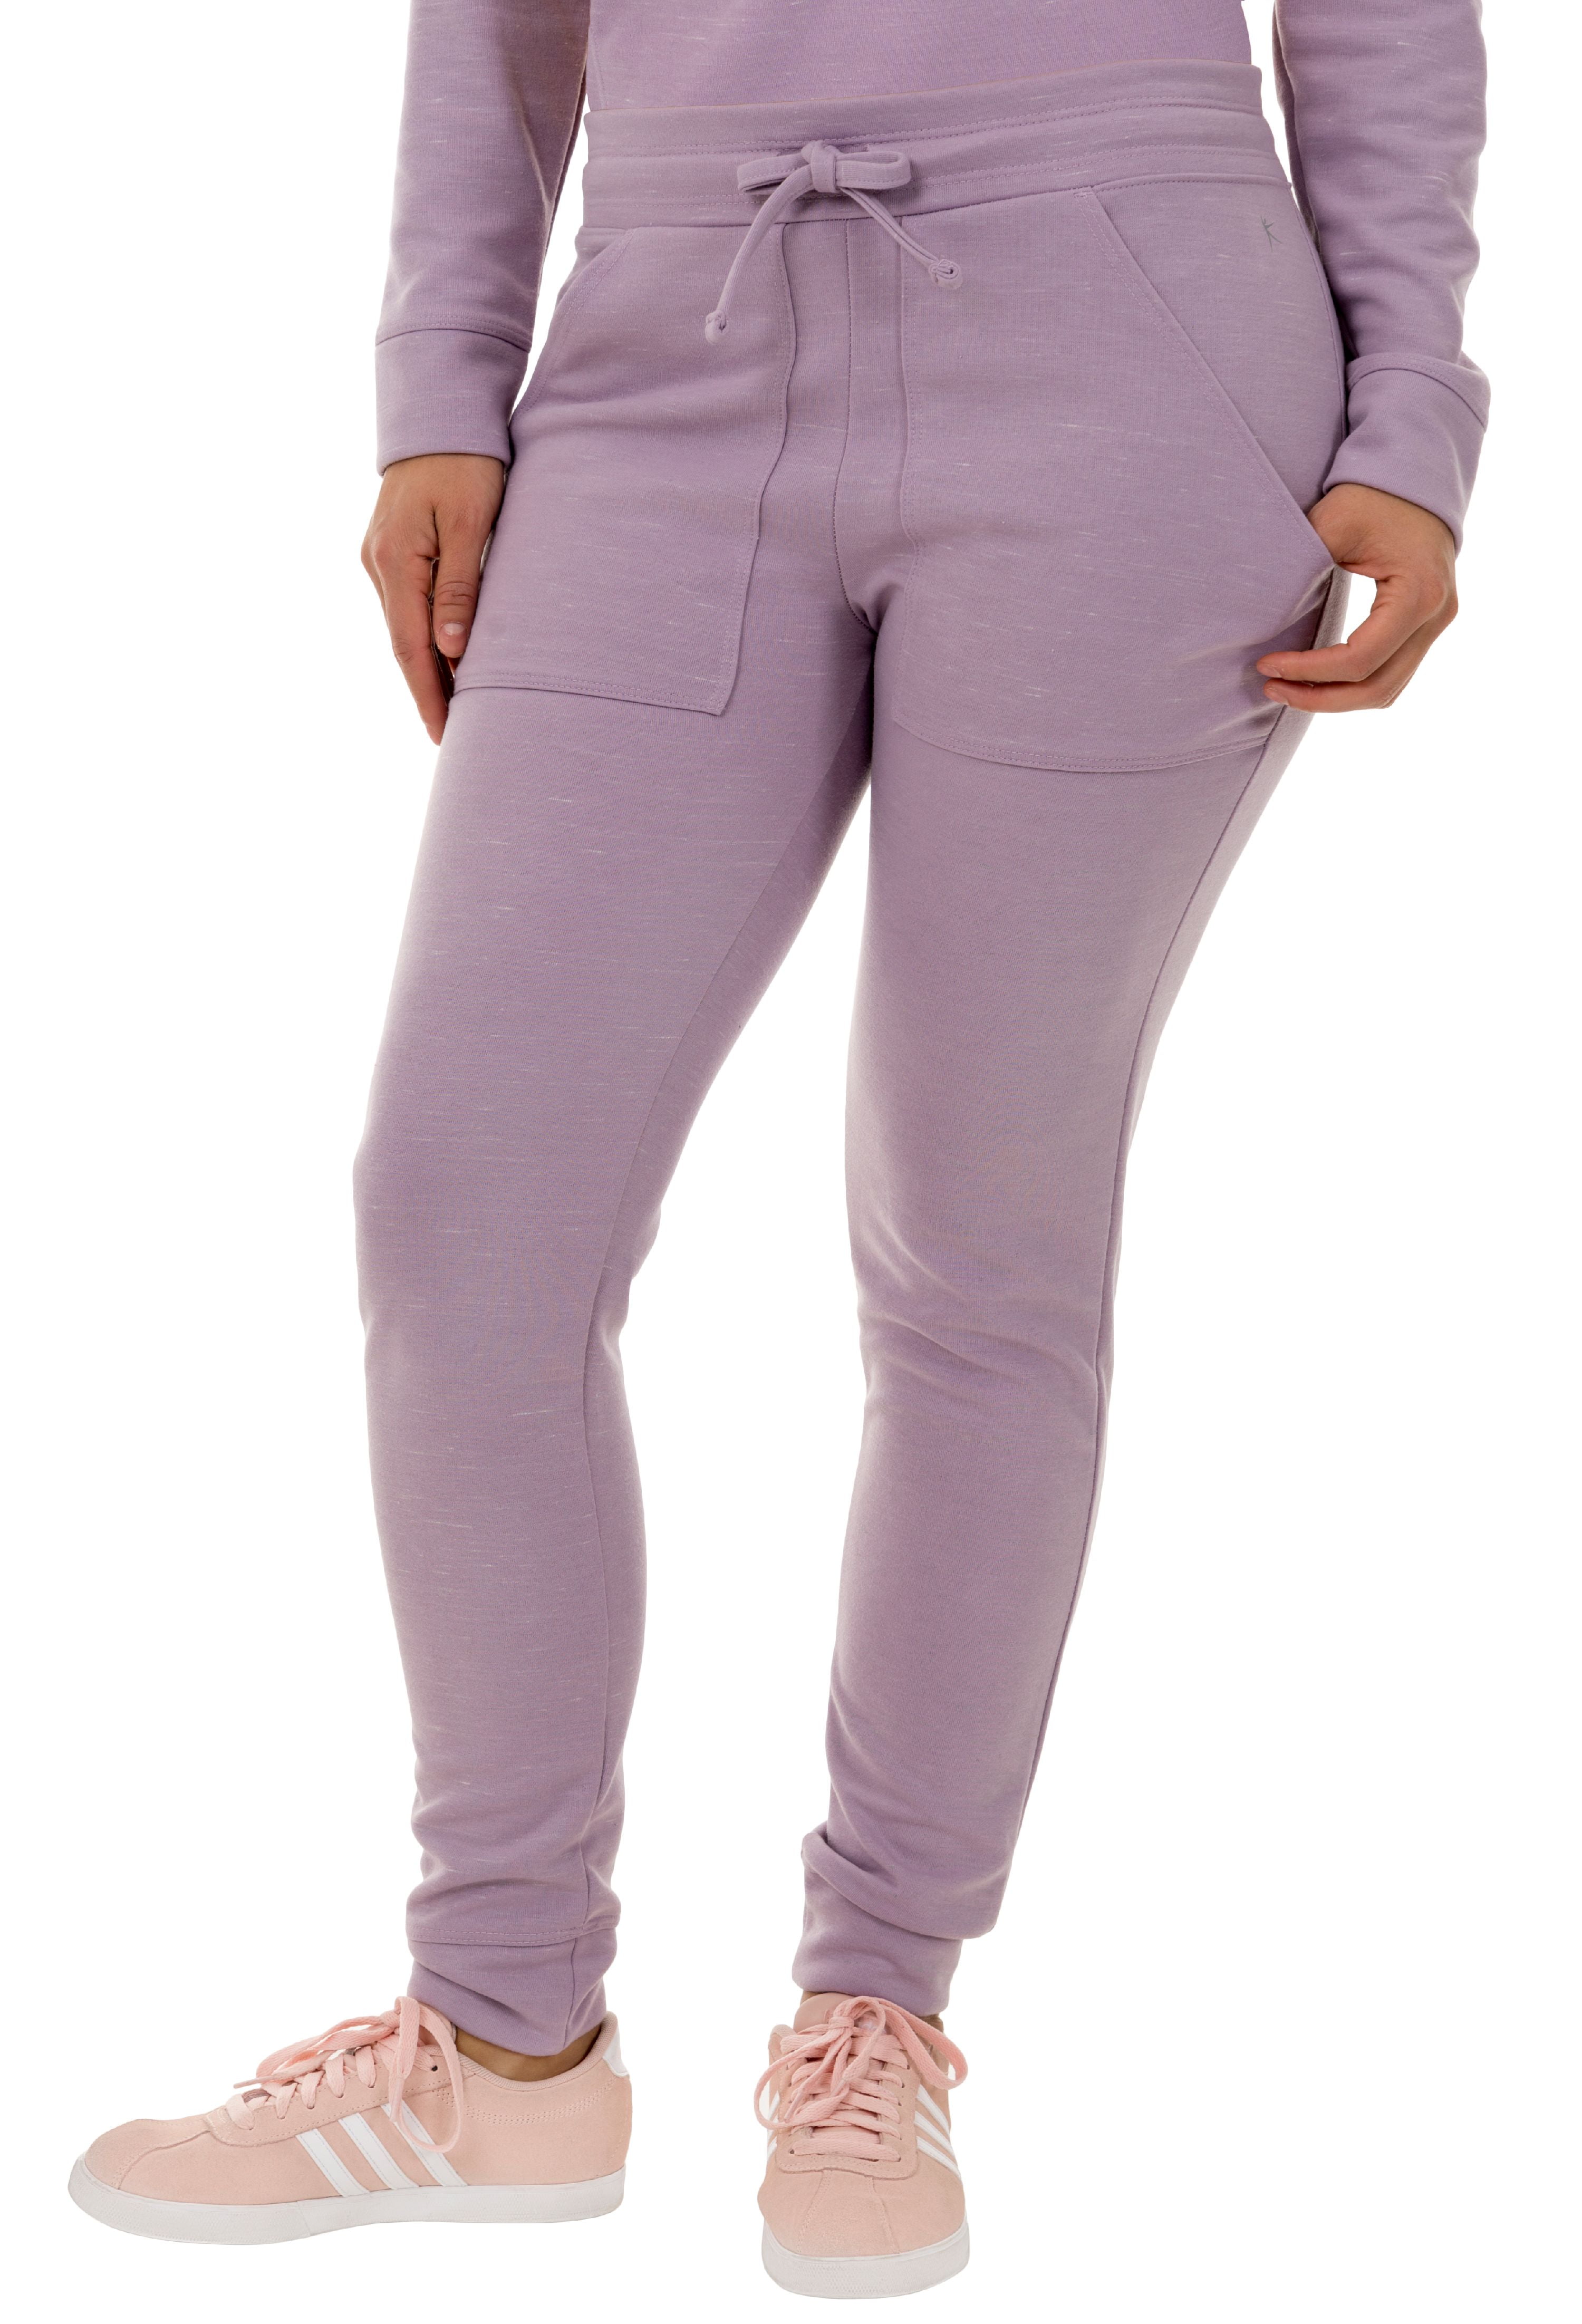 Danskin Now - Women's Athleisure Jogger Pant with Front Pockets ...